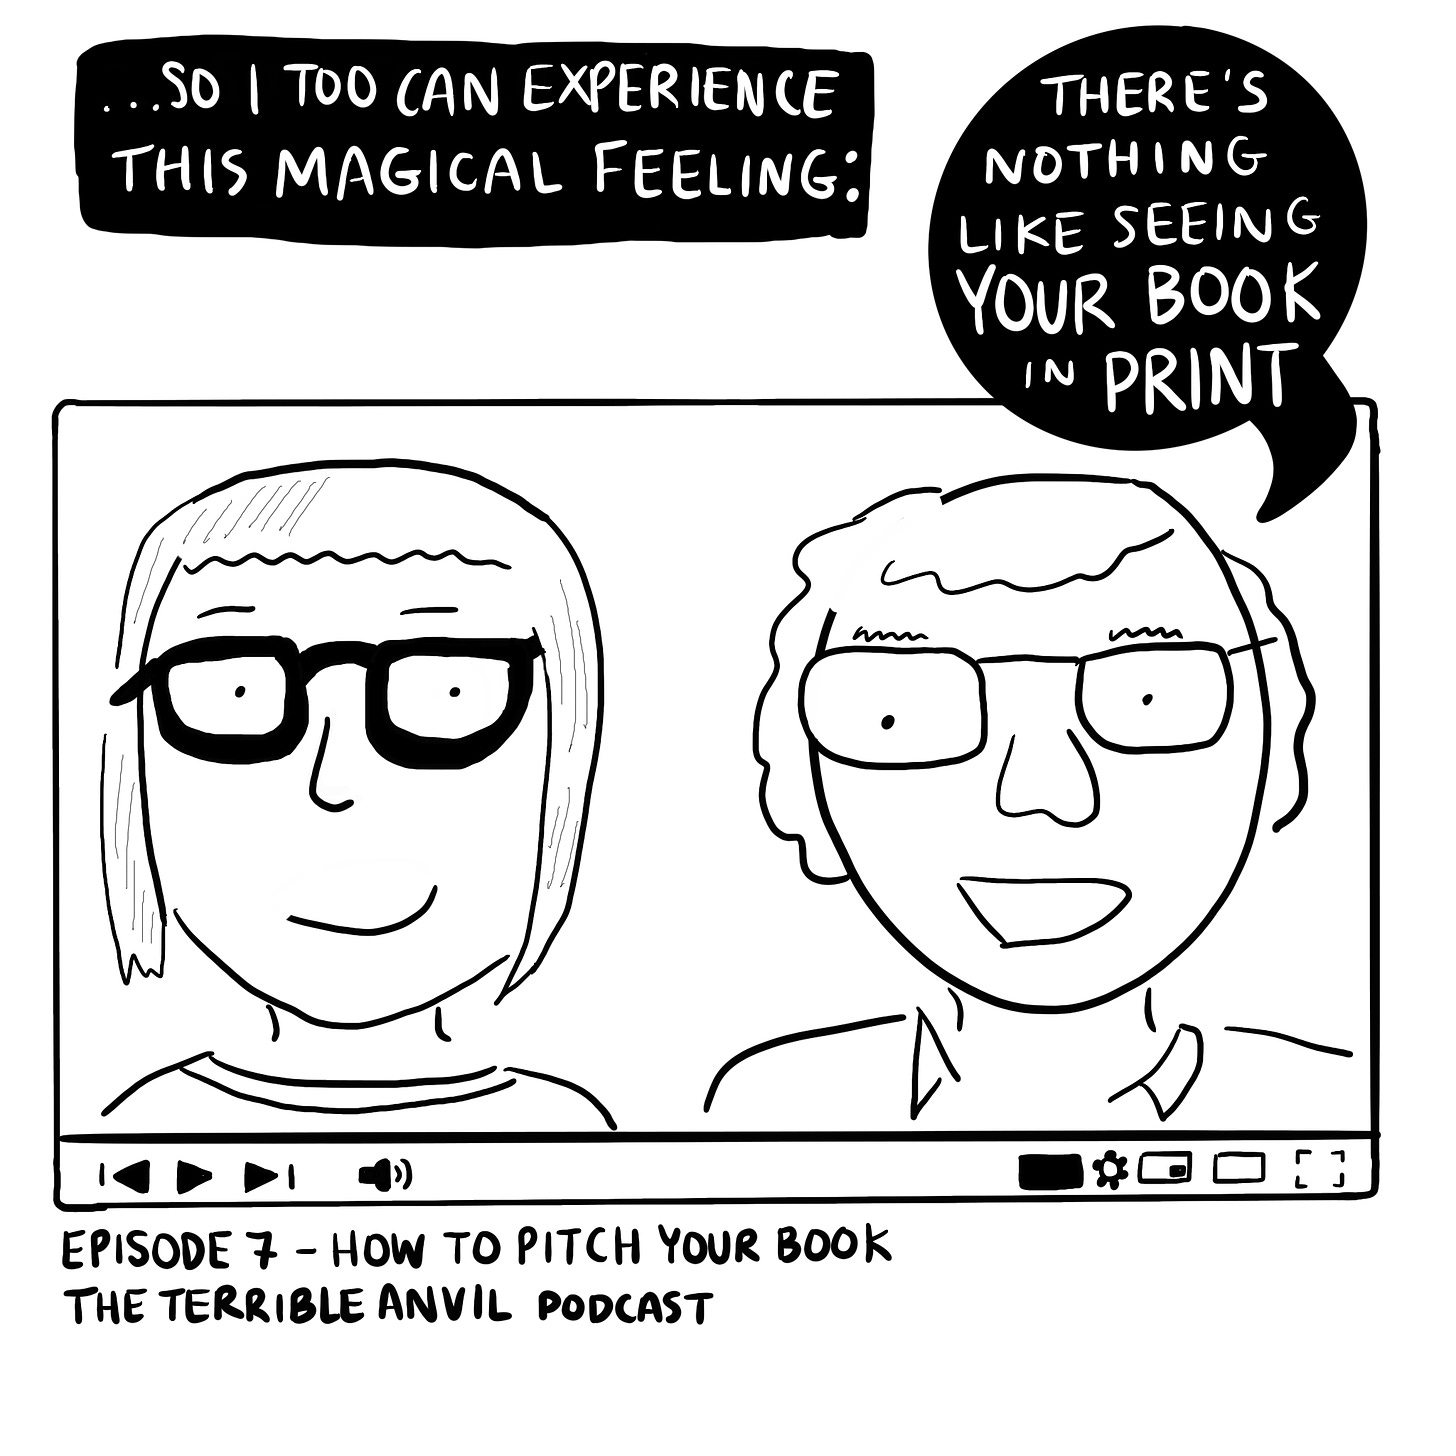 Image of youtube screen--drawn--of Jess Ruliffson and Tom Hart. Text that says "so I too can experience this magical feeling:" Tom saying "there's nothing like seeing your book in print."